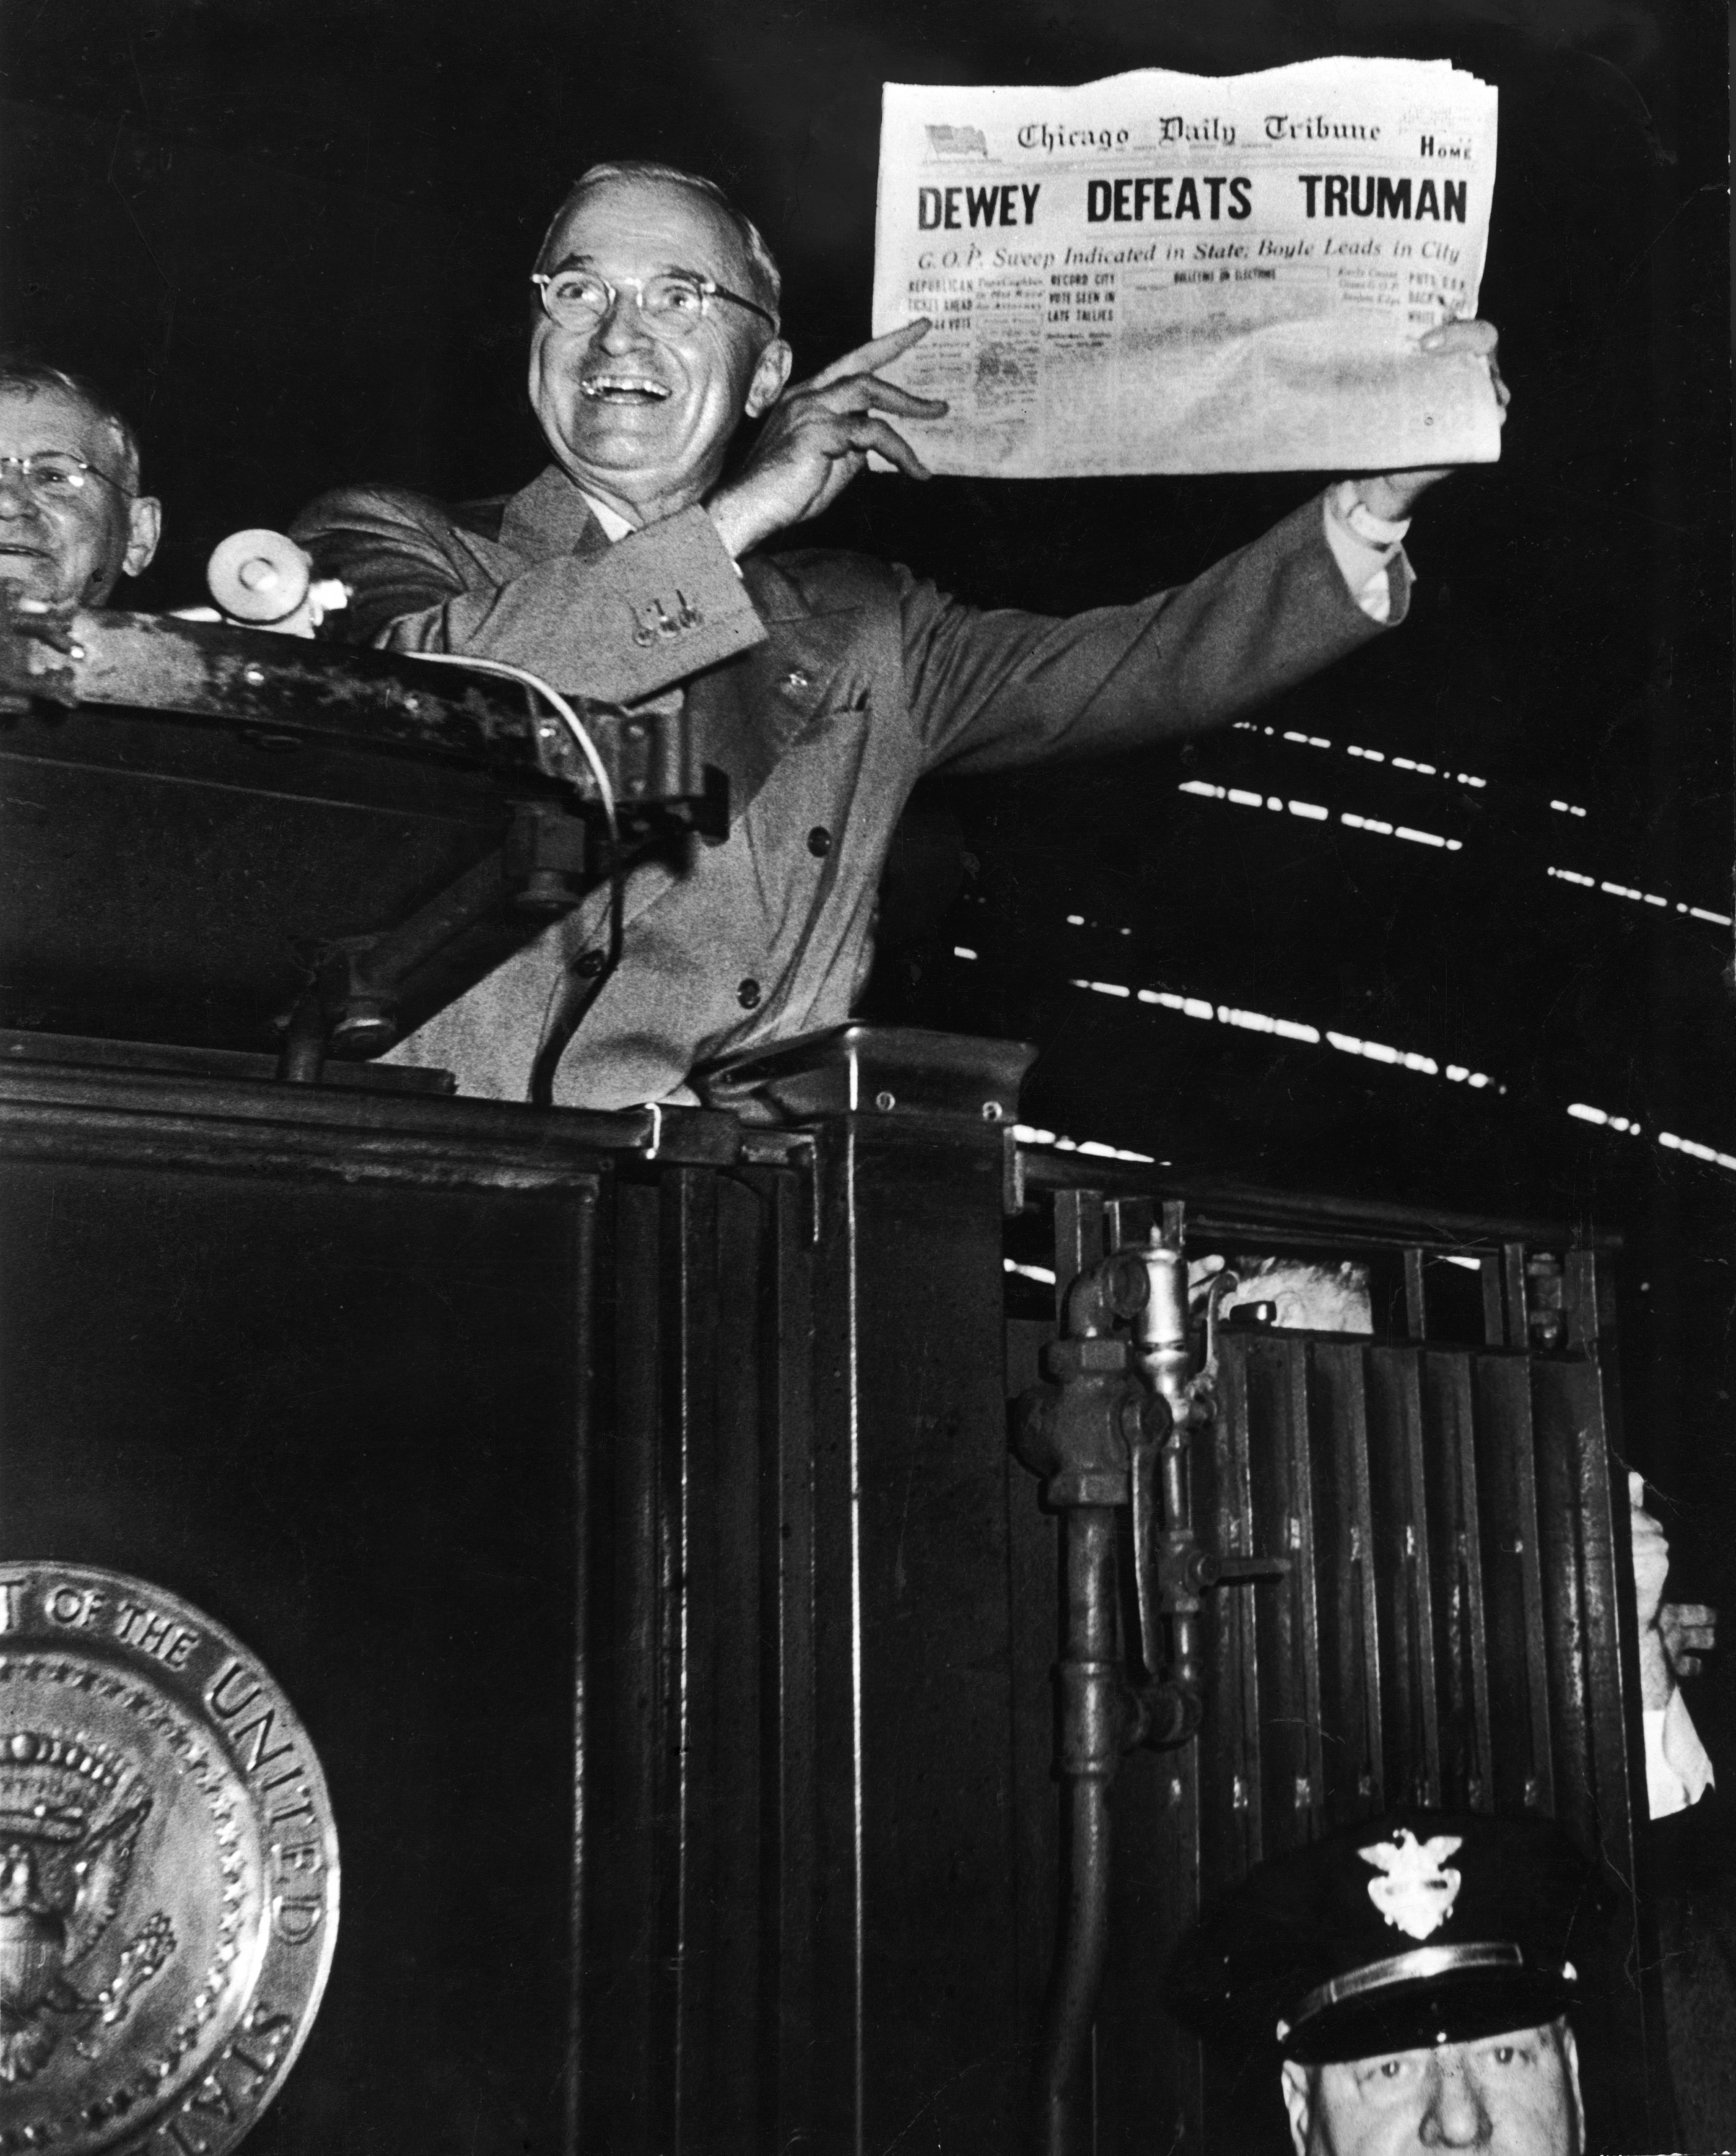 President-elect Harry Truman jubilantly holds up Chicago Daily Tribune newspaper with headlines  DEWEY DEFEATS TRUMAN  which overconfident Republican editors had rushed to print on night of the election.